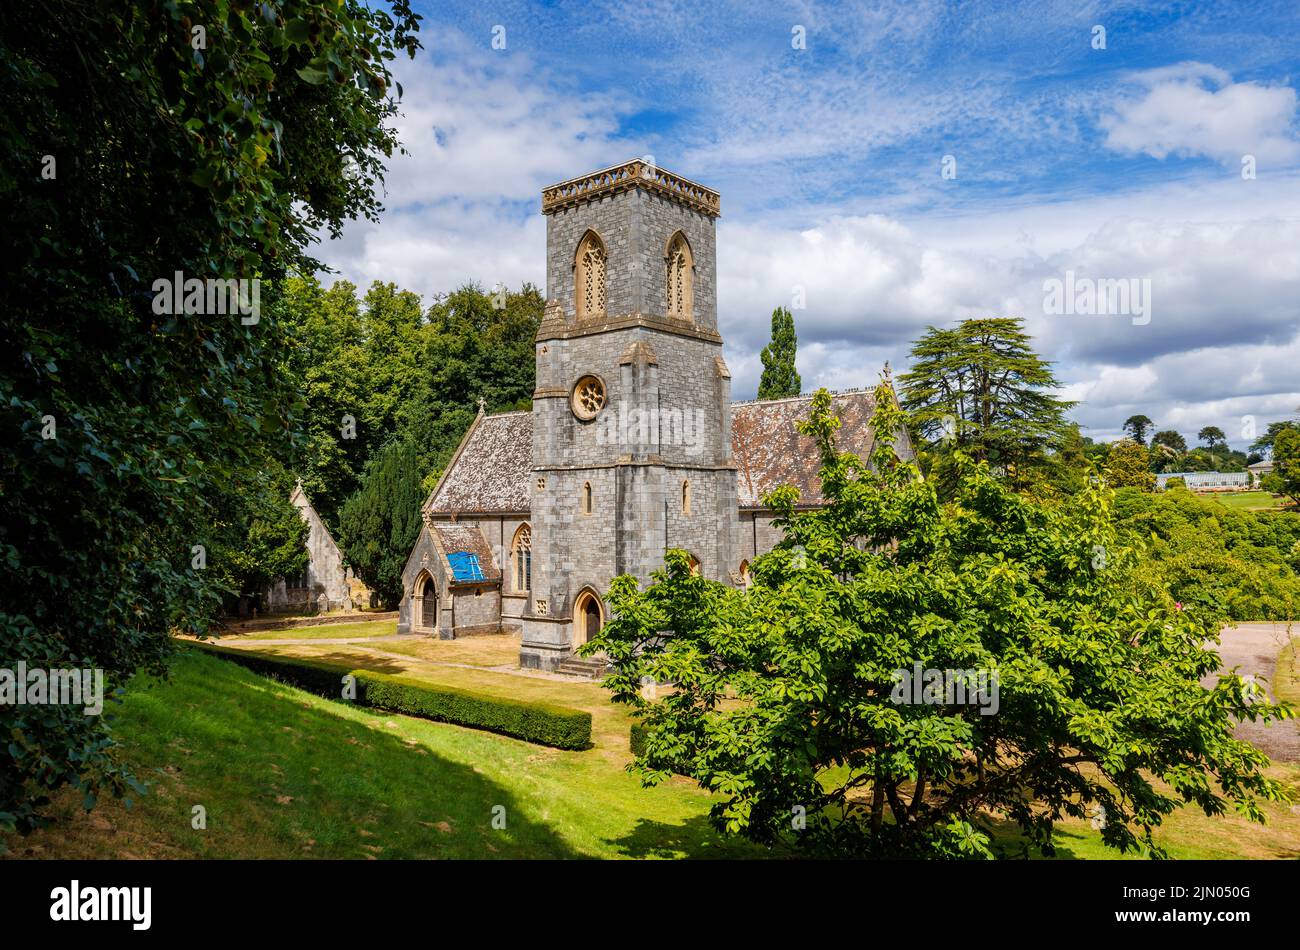 St Mary's Church in Bicton Park Botanic Gardens near East Budleigh in East Devon, south-west England Stock Photo